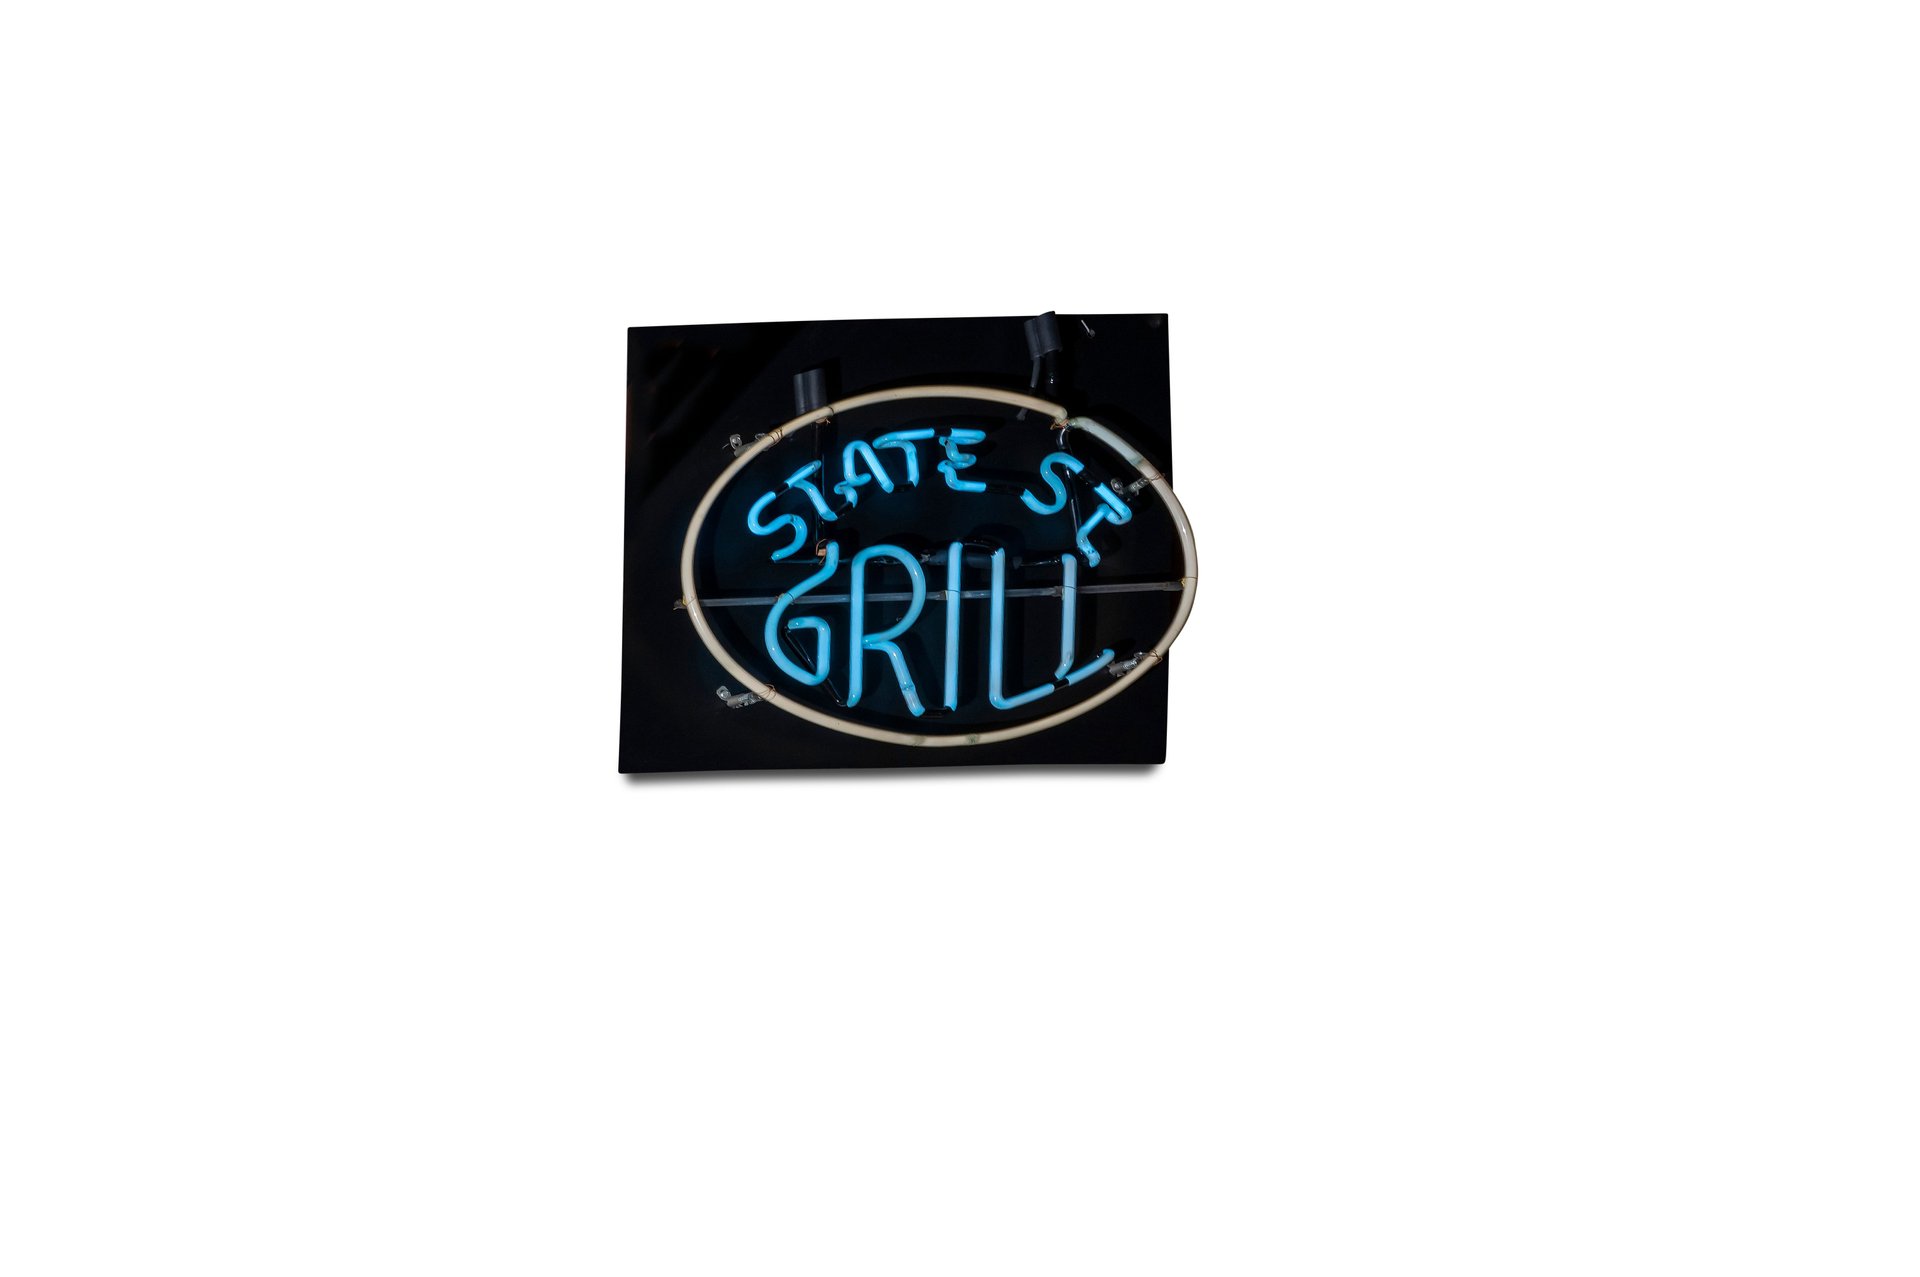 For Sale State St. Grill Neon Sign